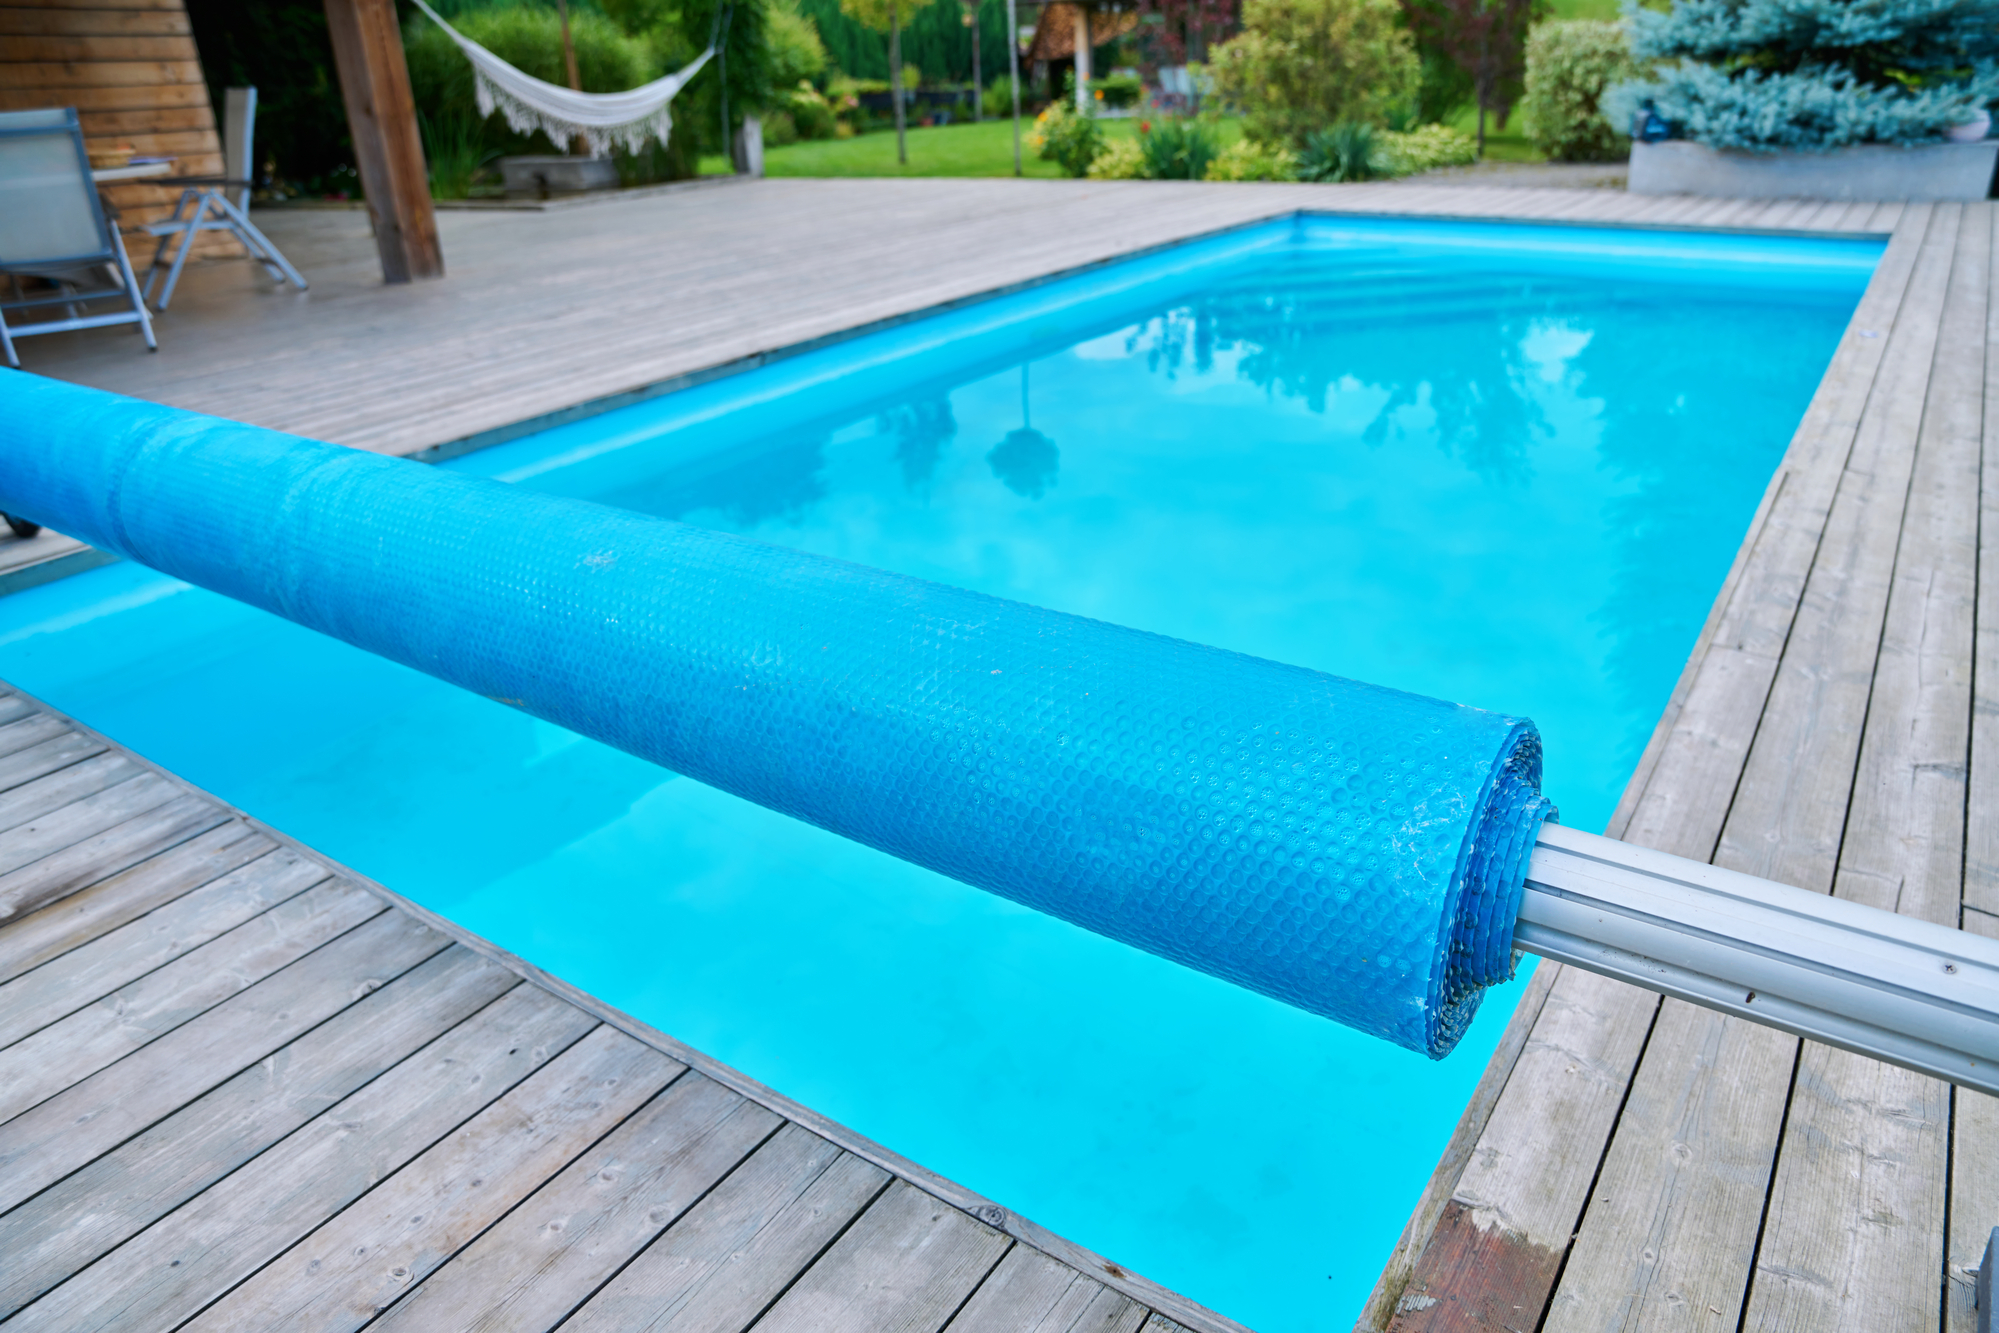 Swimming pool with a blue bubble cover partially rolled up on the deck